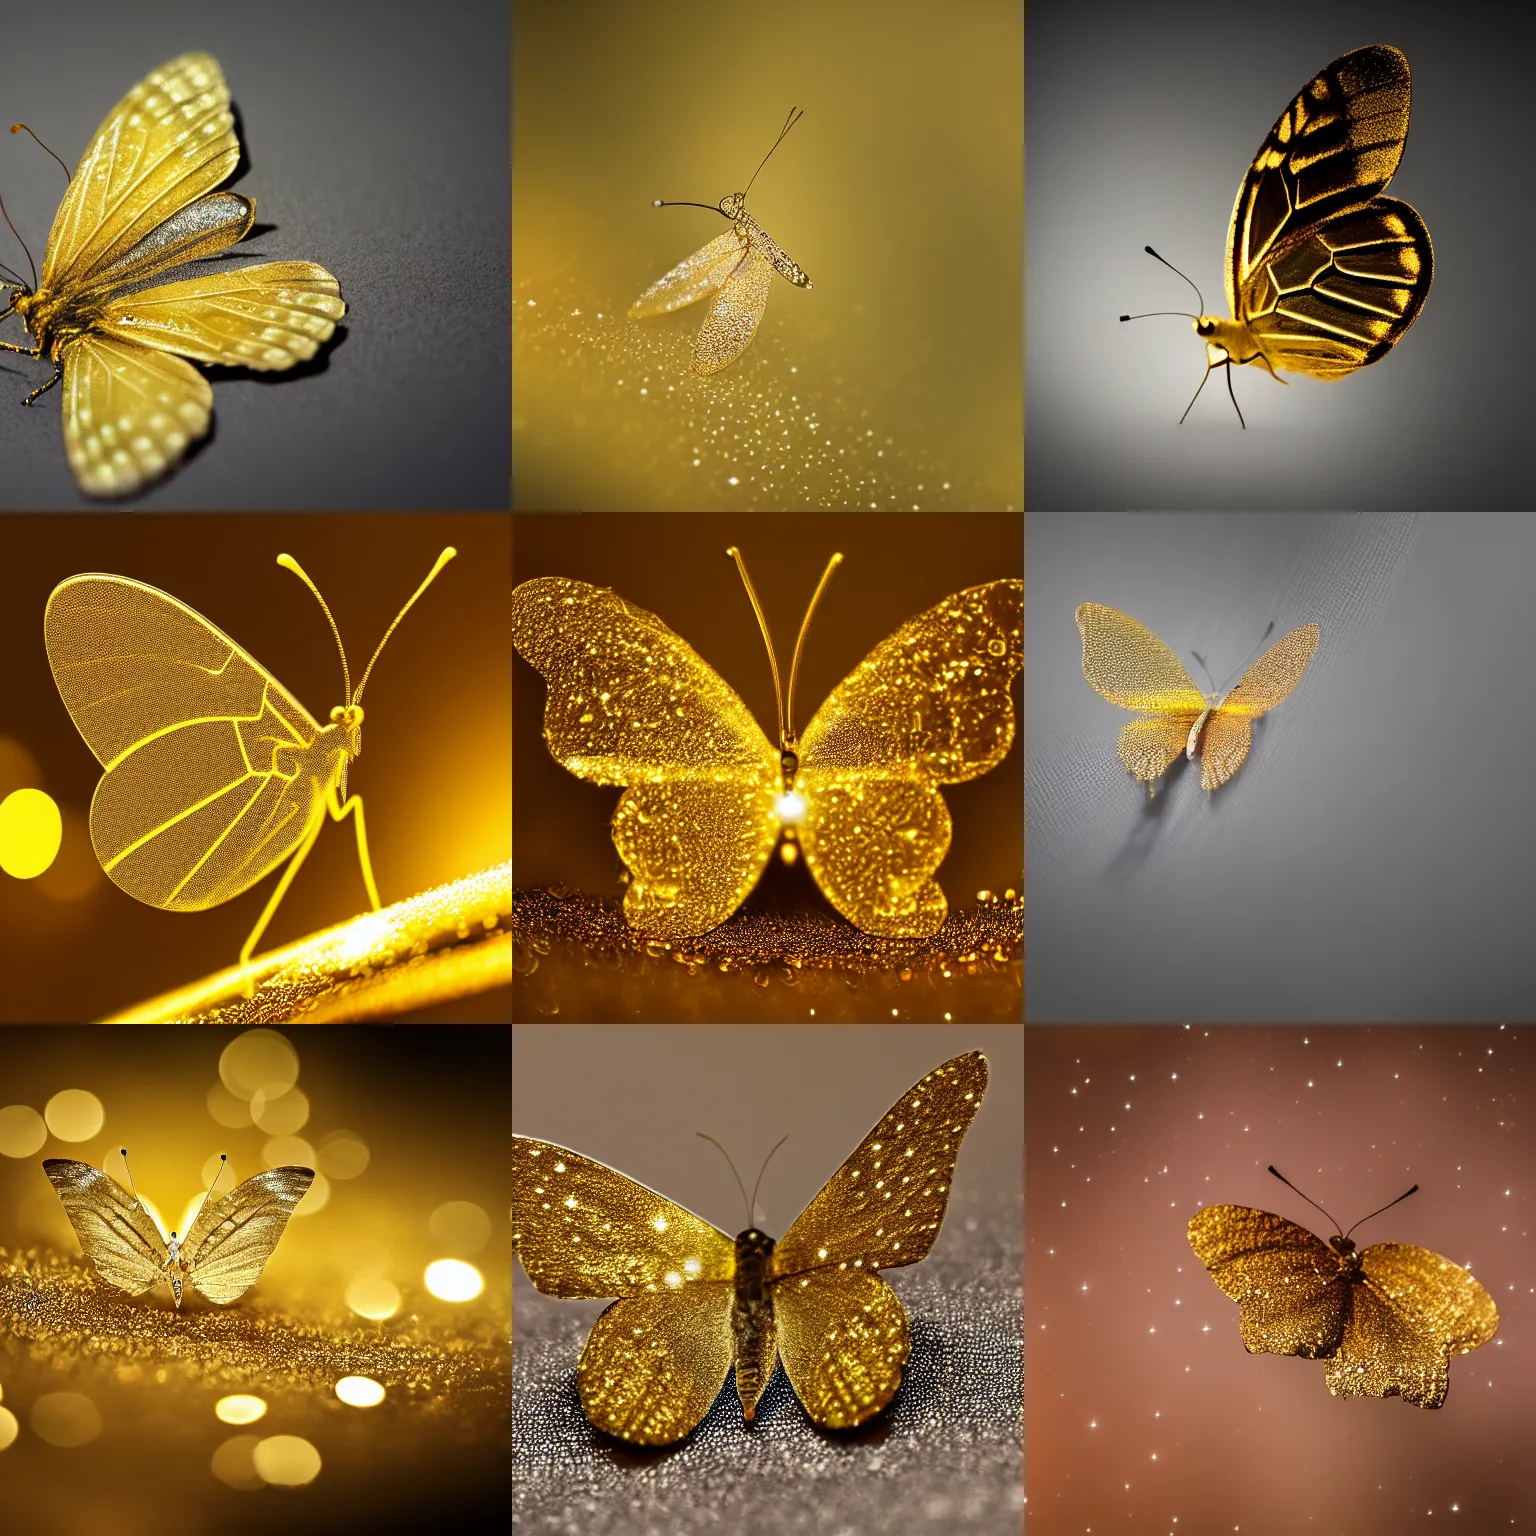 Whimsical Fantasy Flight of Gold Butterflies All of Maximalist with ·  Creative Fabrica